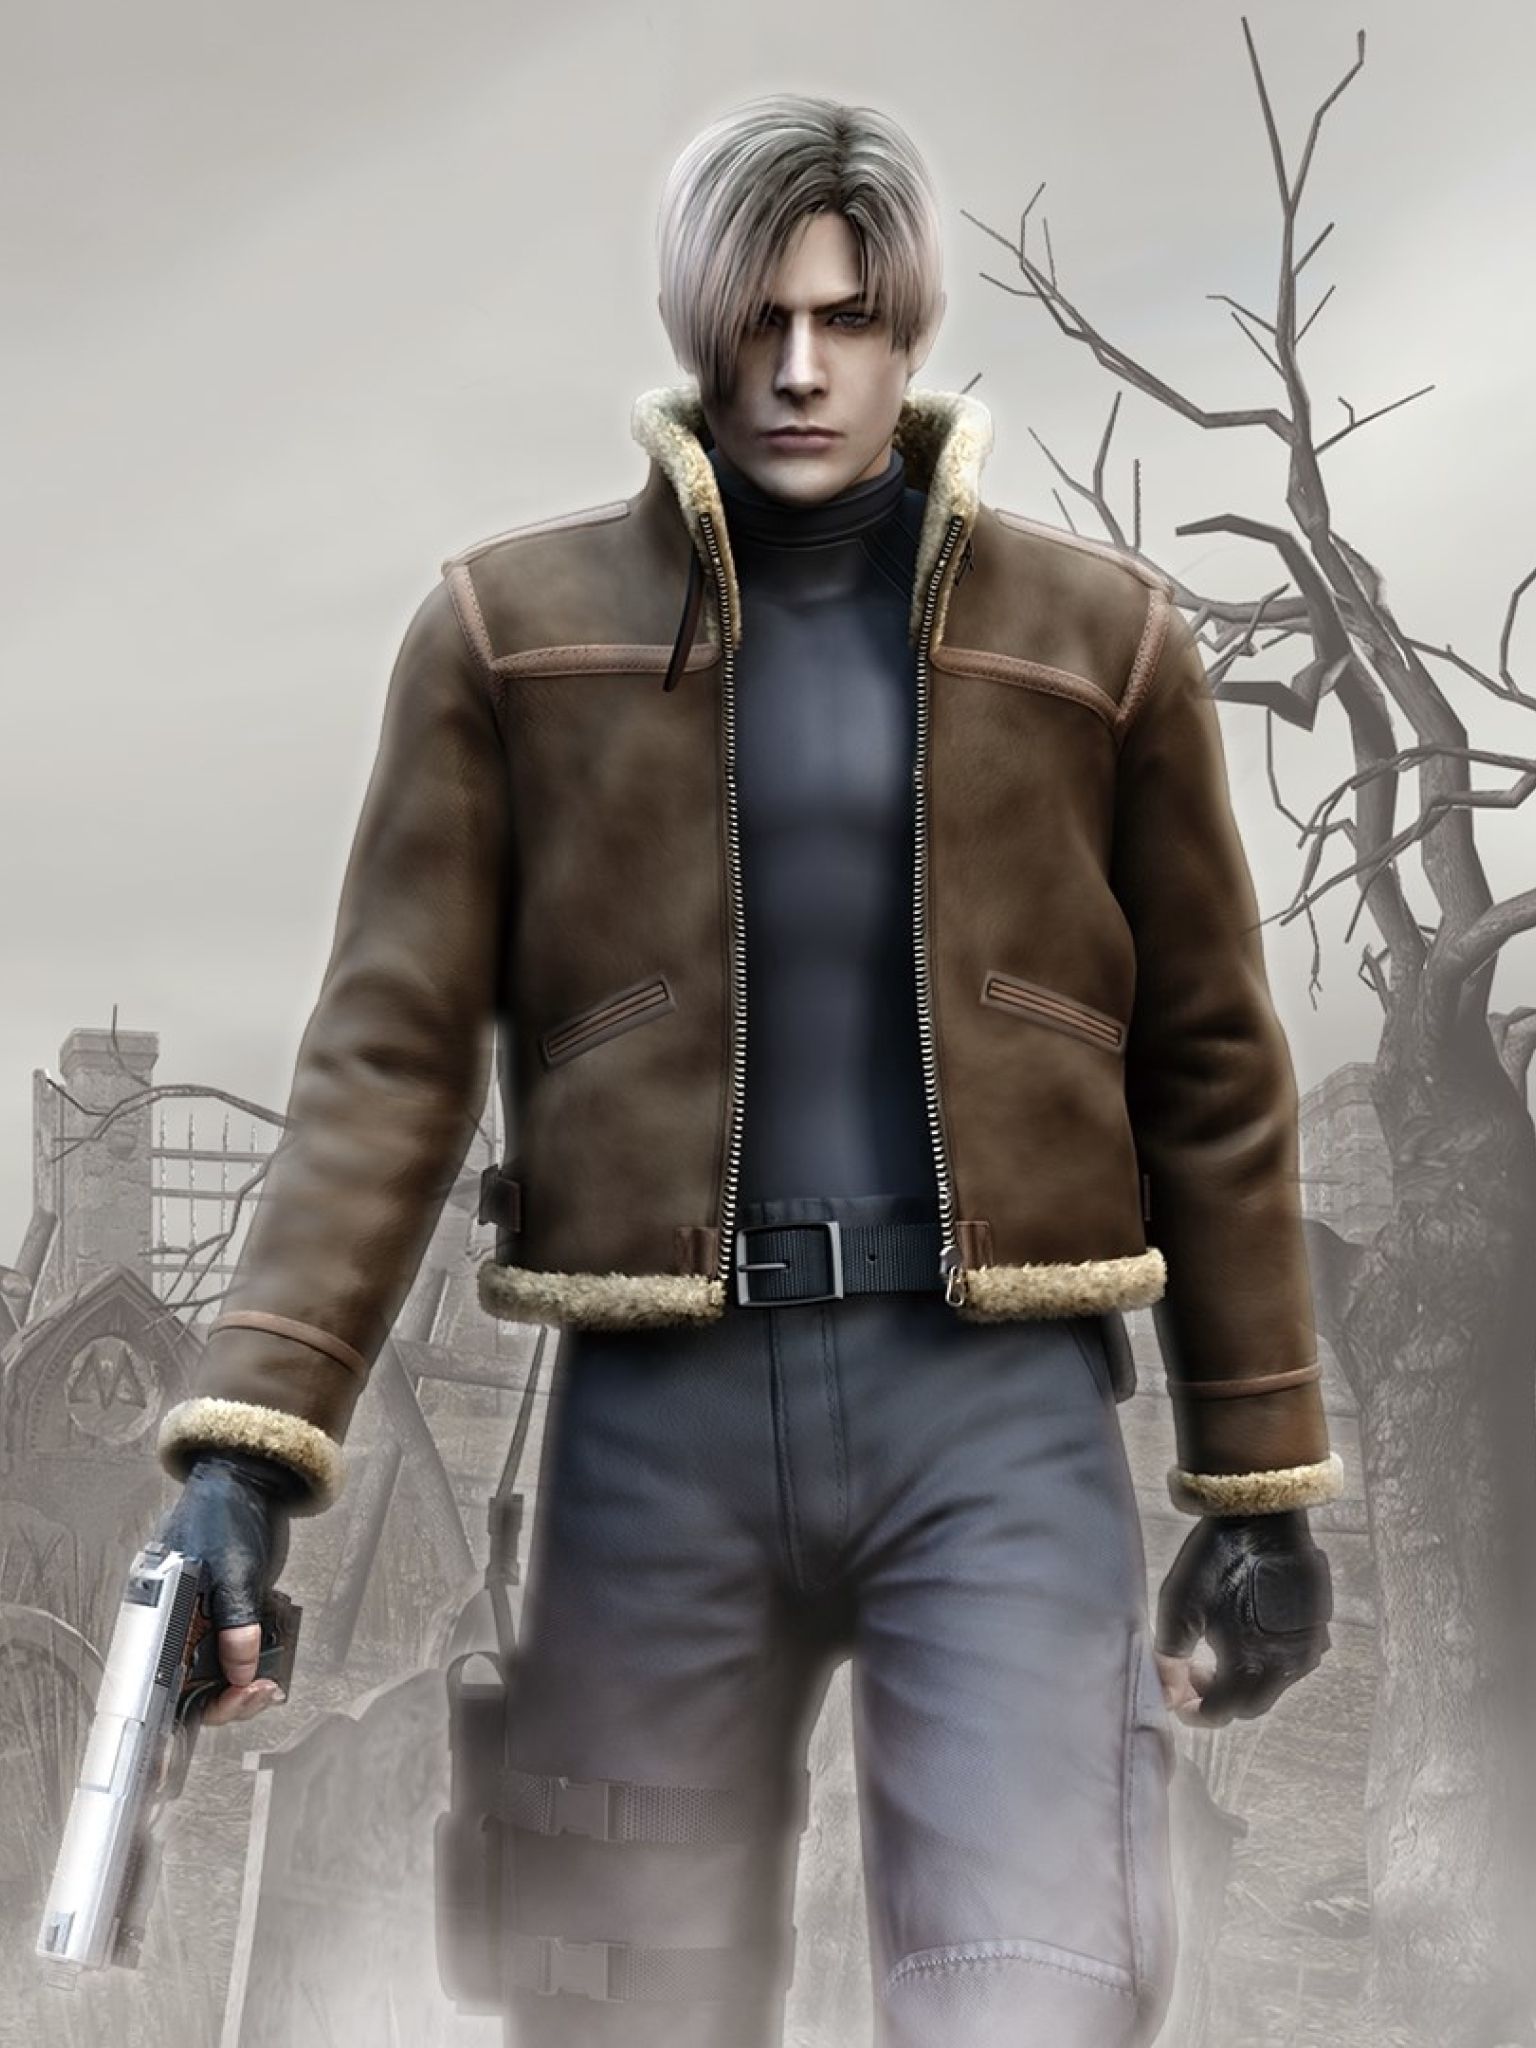 Resident Evil 4 For Android Phone Wallpapers - Wallpaper Cave